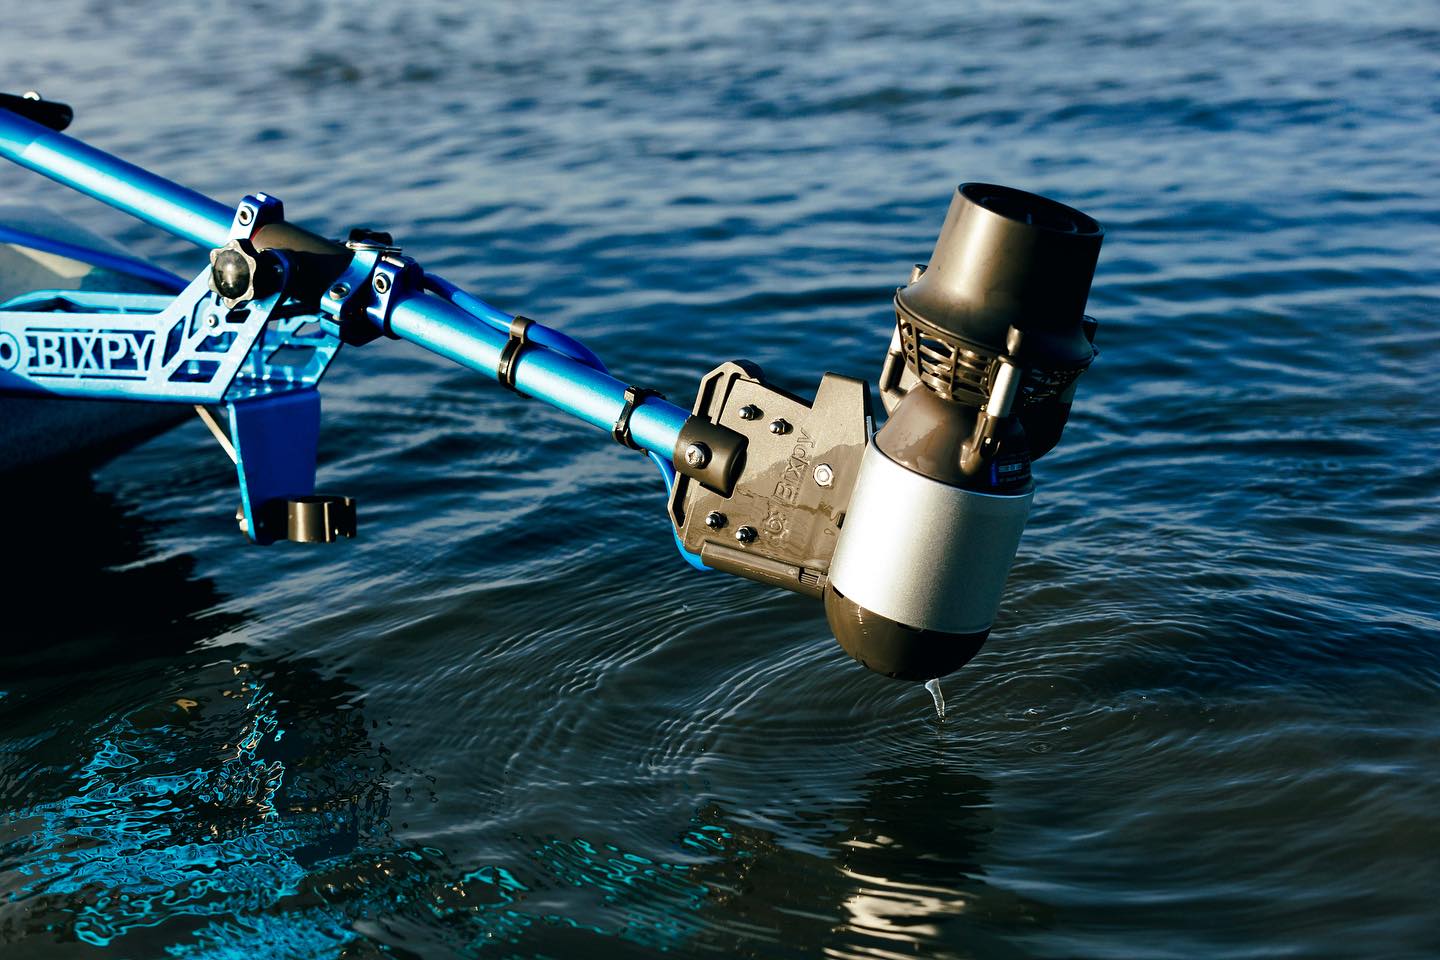 K-1 motor coming out of the water attached to a watercraft